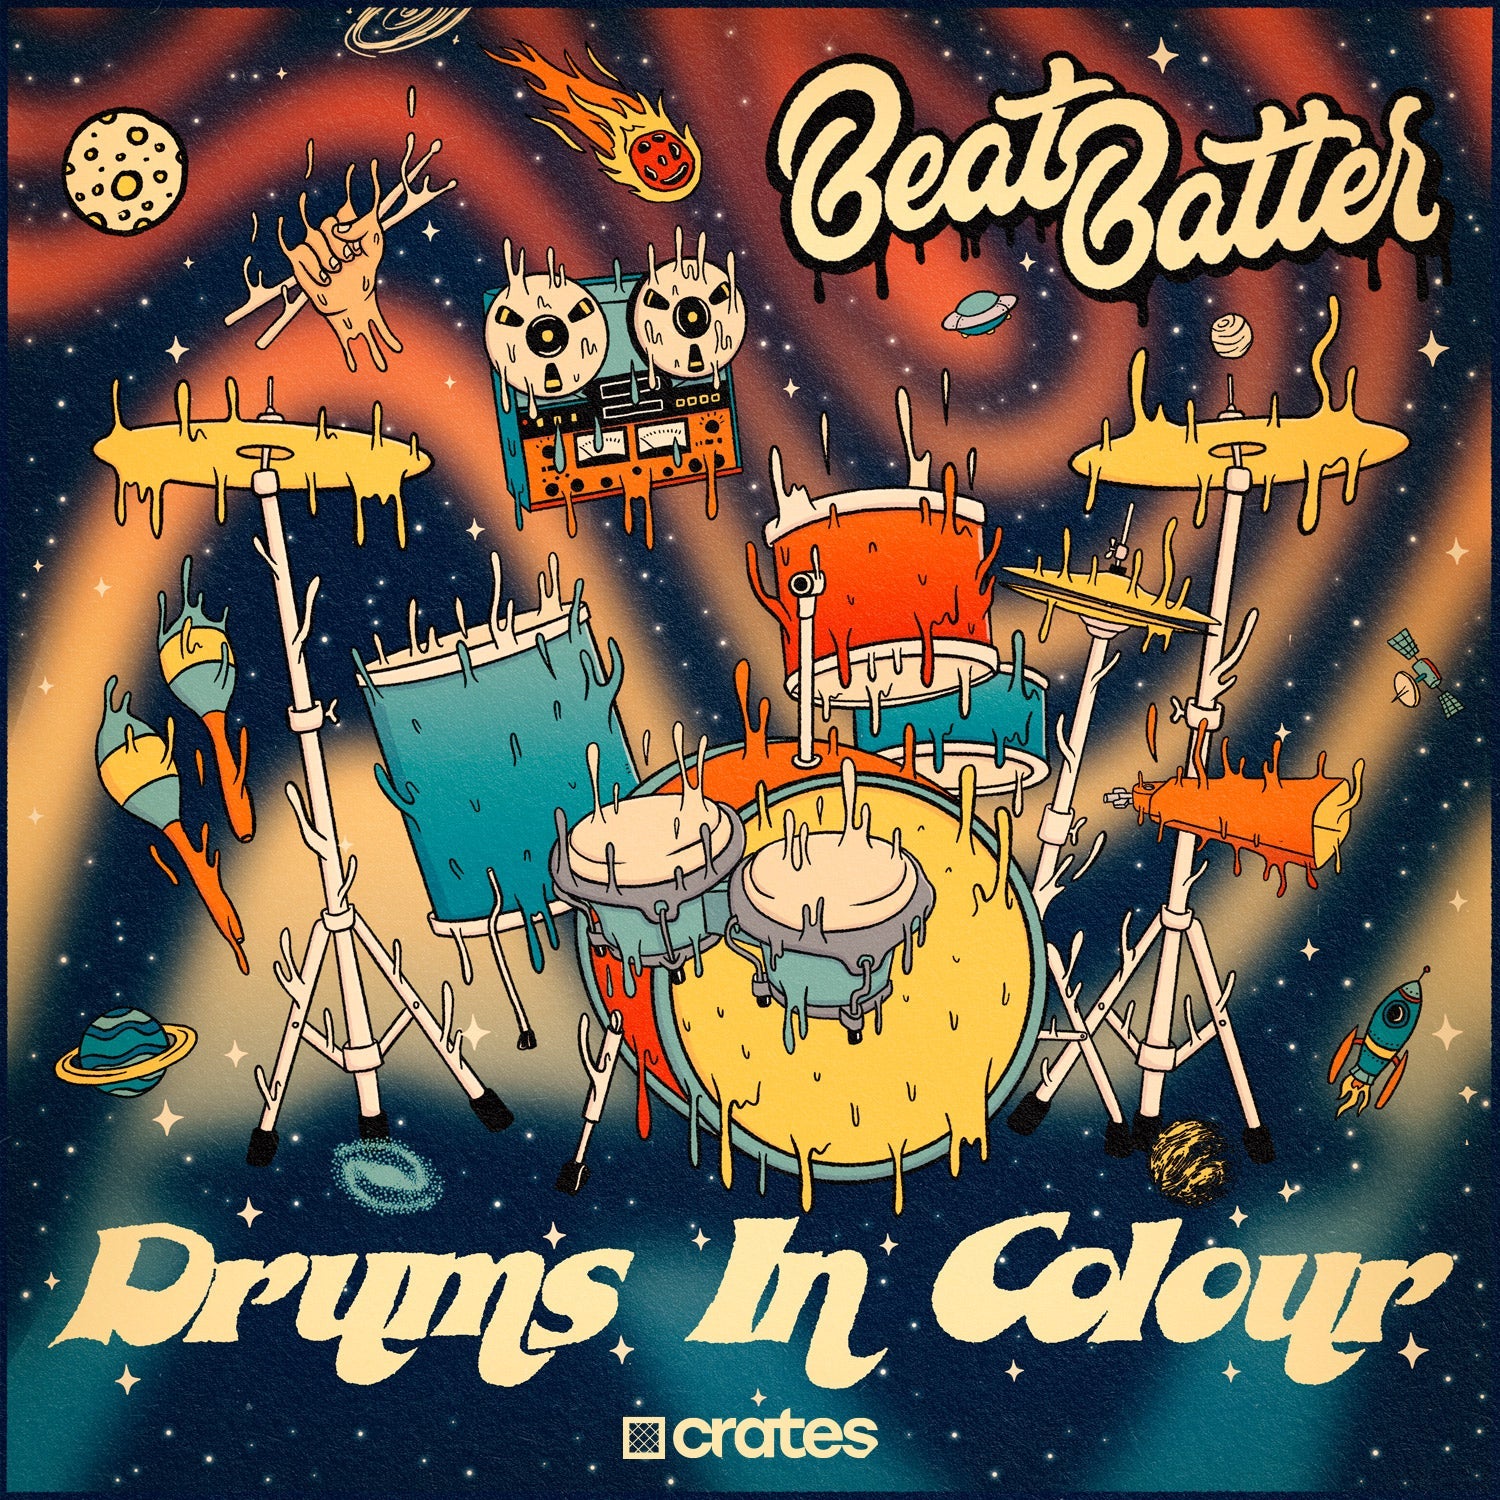 Beat Batter Kits - Drums In Colour